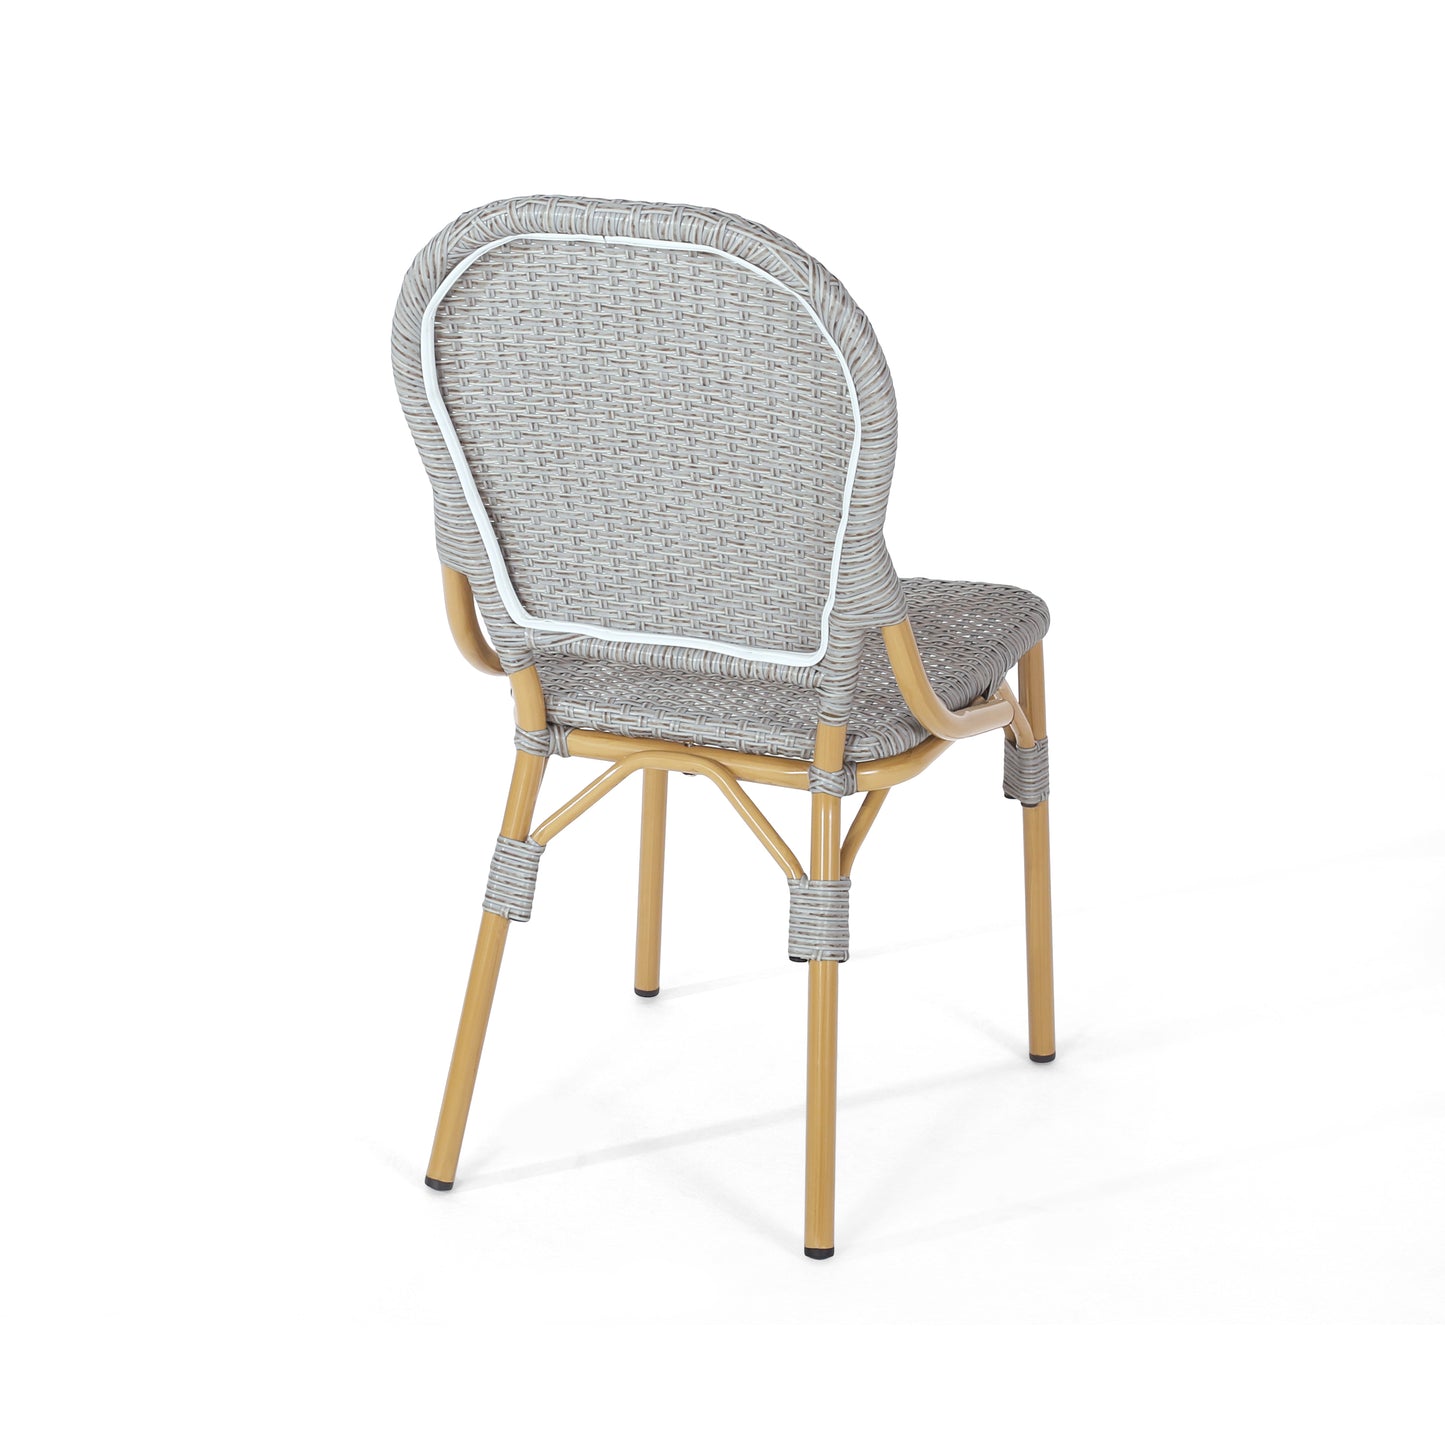 Gallia Outdoor Aluminum French Bistro Chairs, Set of 2, Grey and Bamboo Finish